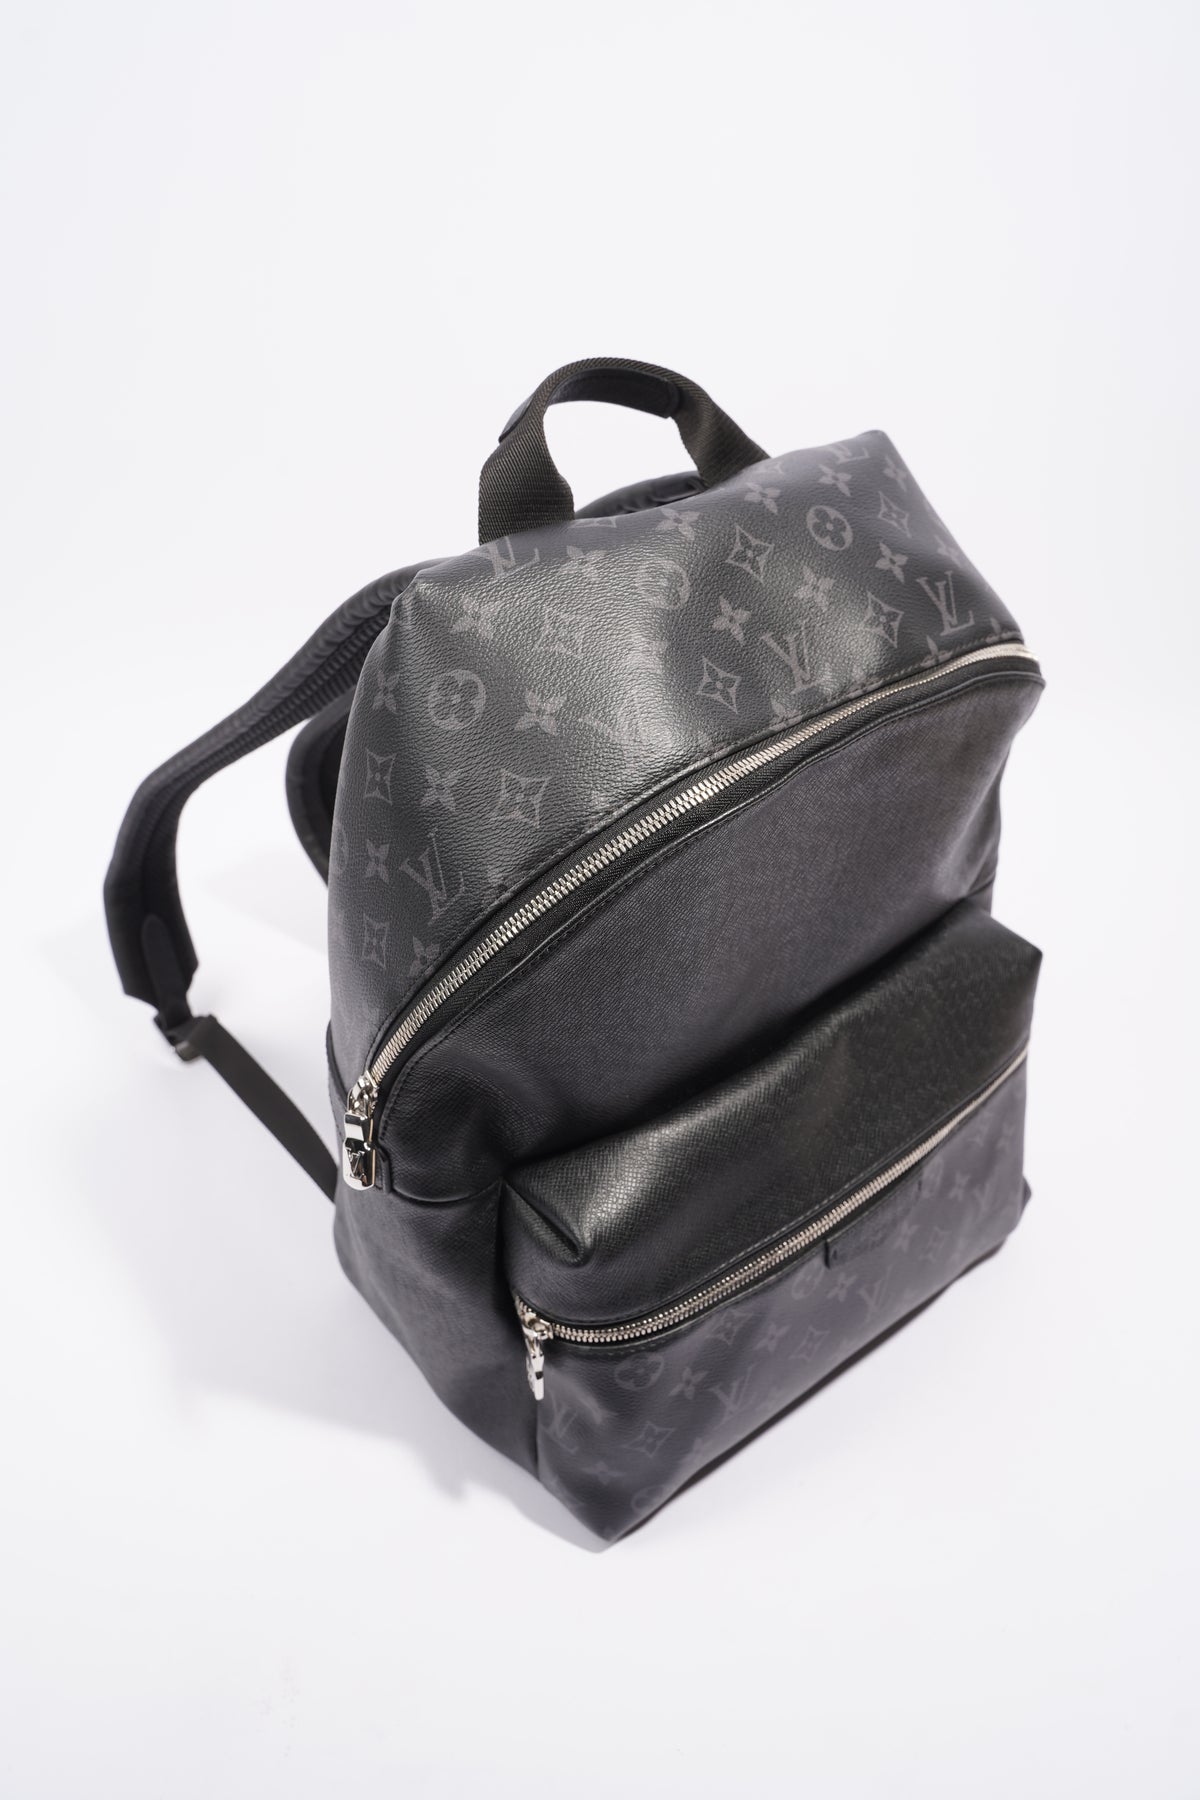 Discovery Backpack PM Monogram Eclipse - Bags